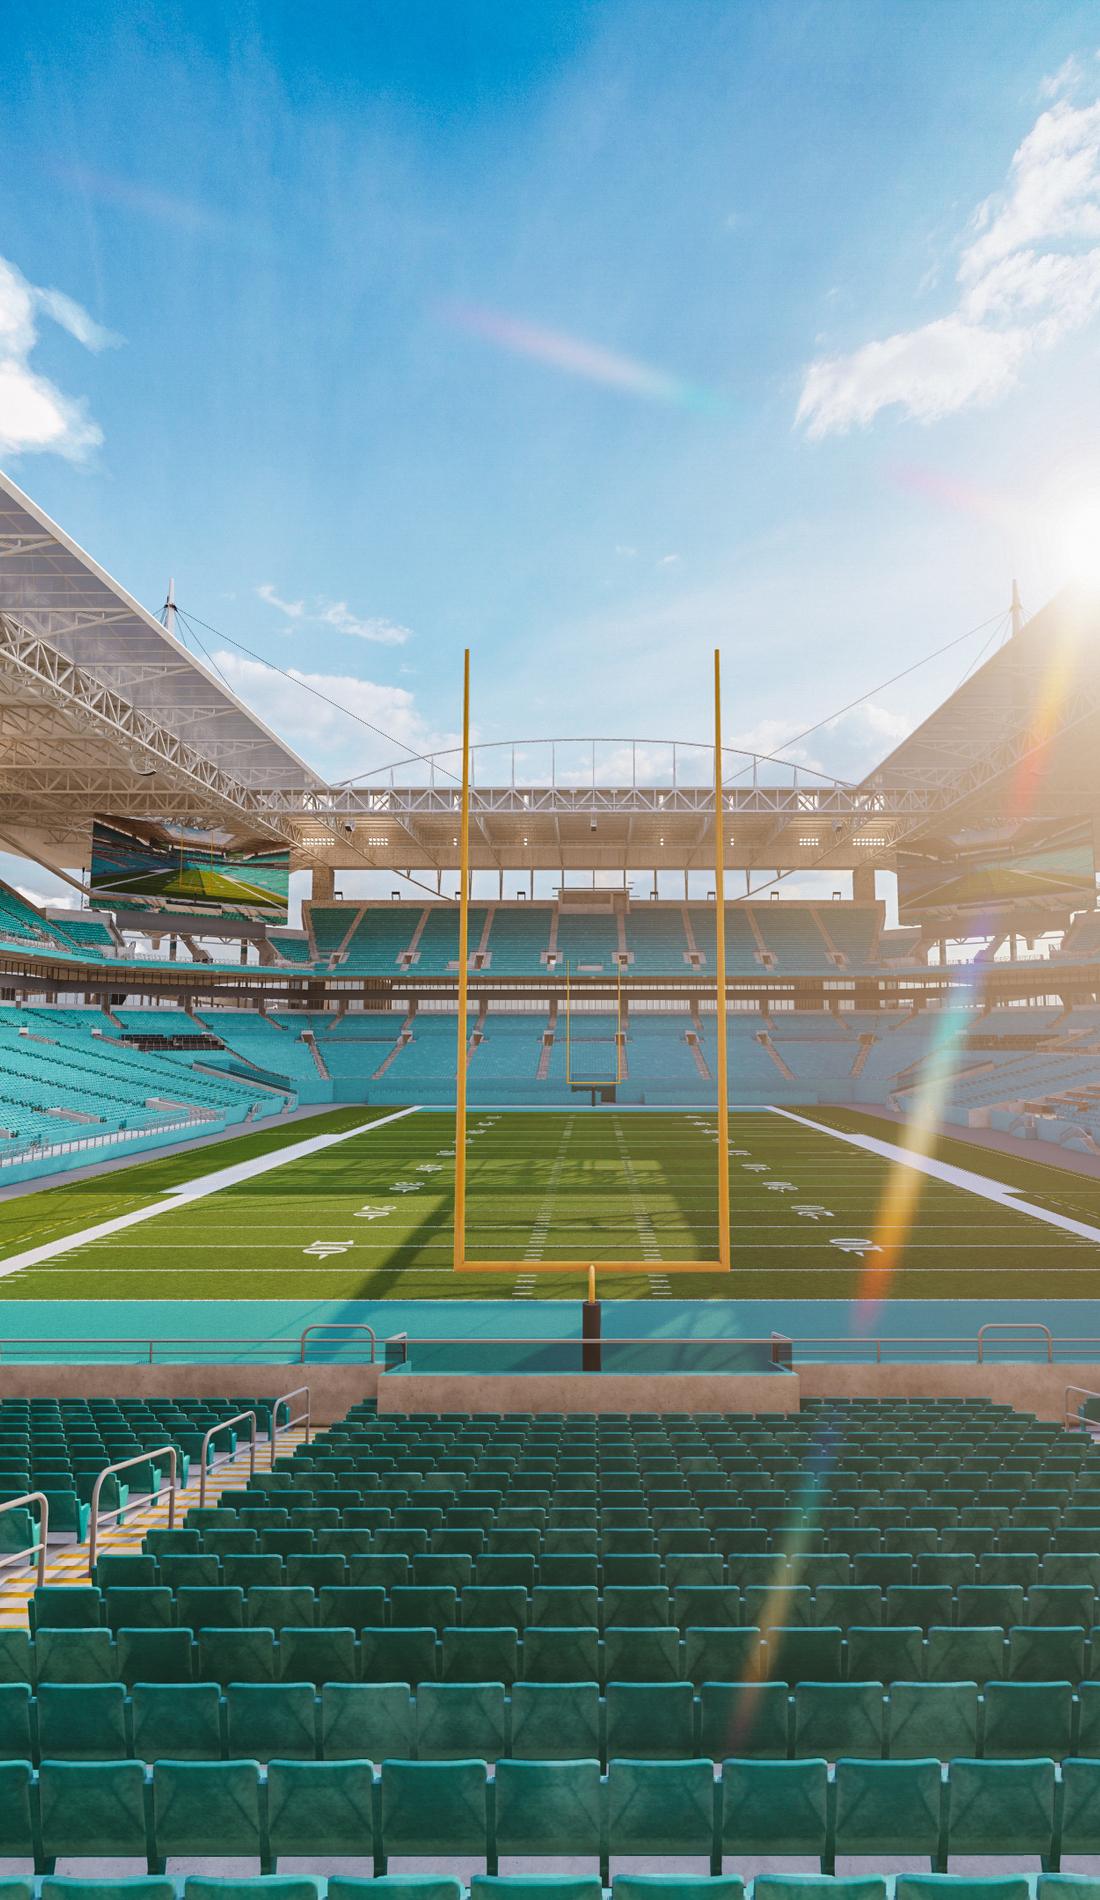 miami dolphins tickets for sale by owner